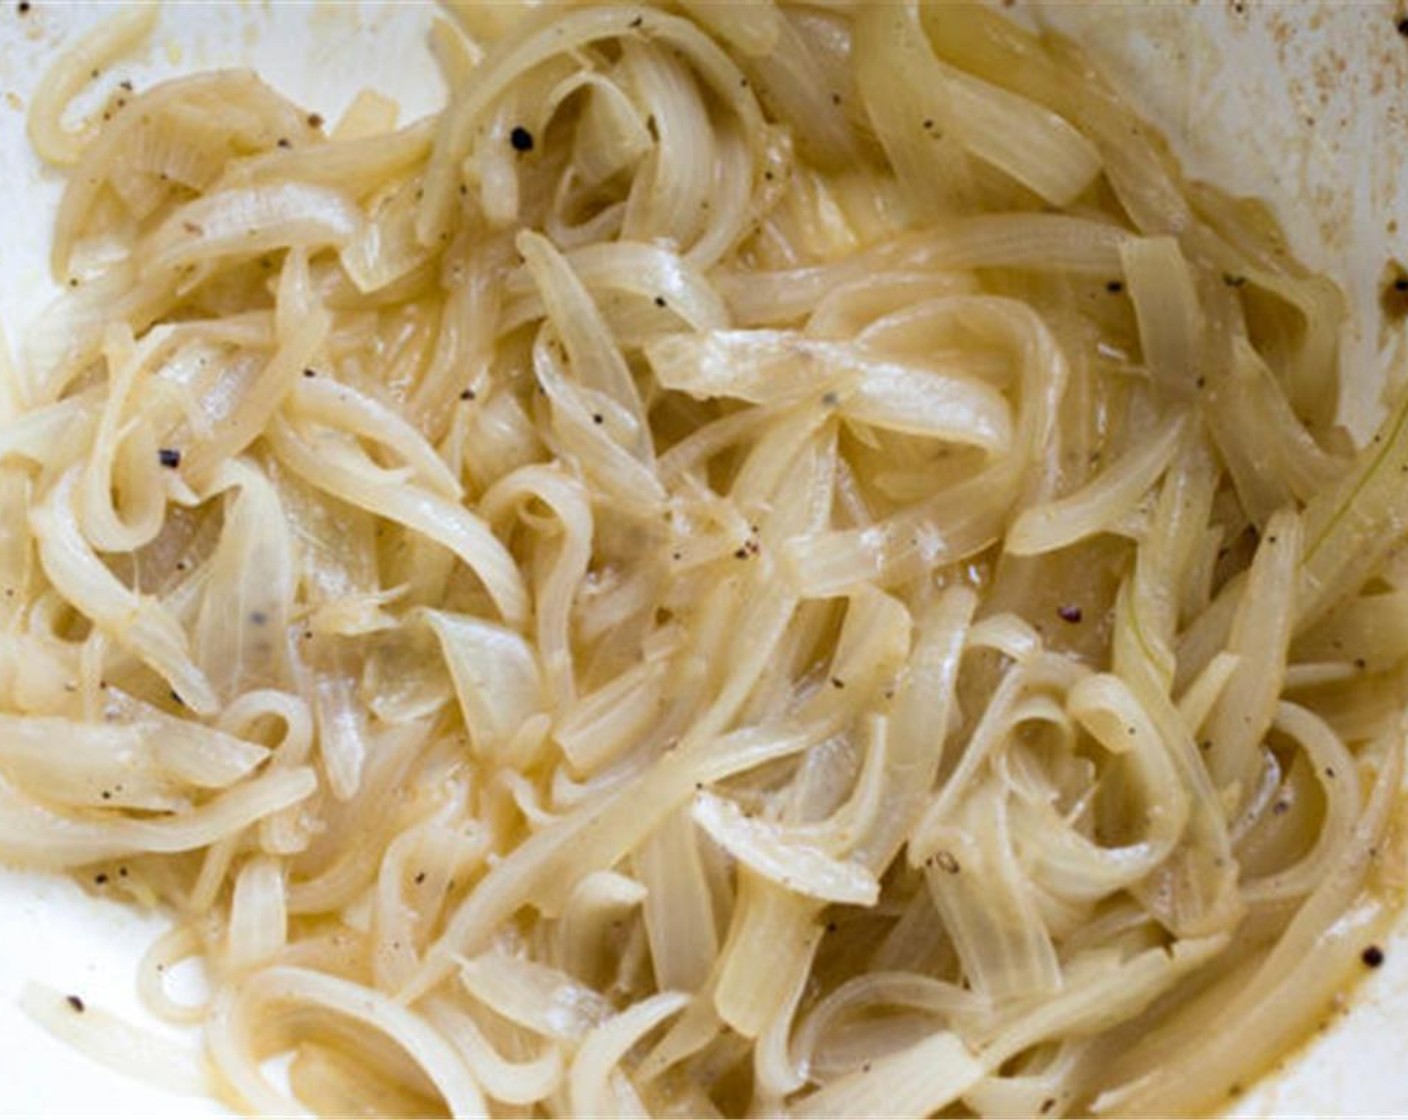 step 2 Place the onions in a large non-stick skillet over medium heat with 1 tablespoon of Extra-Virgin Olive Oil (1/4 cup), McCormick® Garlic Powder (1/2 tsp), Ground Black Pepper (to taste) and 2 tablespoon water. Evenly coat the onions and stir occasionally to prevent burning.